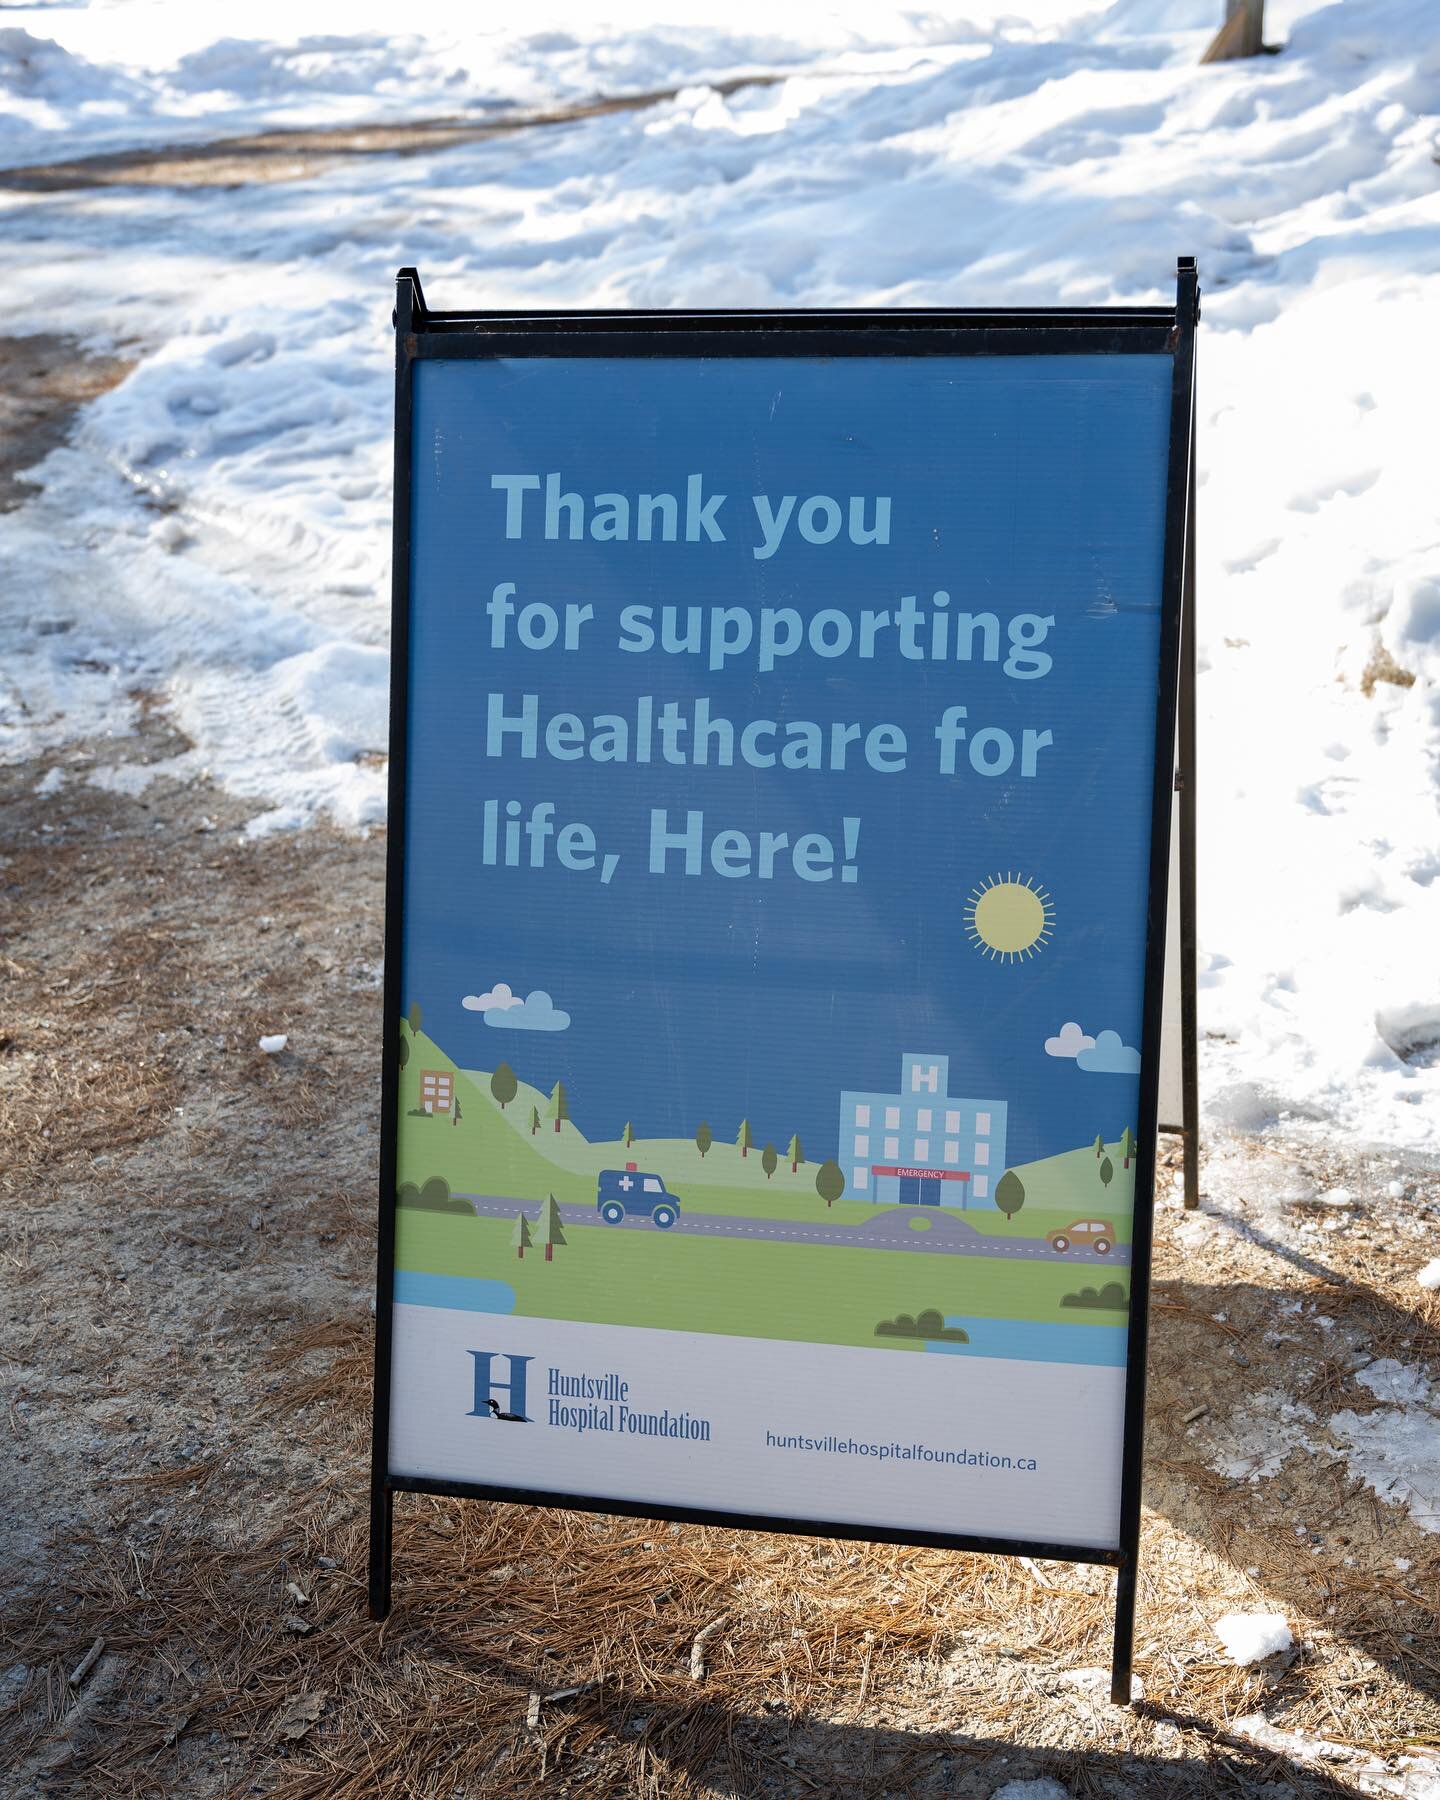 🎉 A Heartfelt Thank You to Everyone Who Joined Us at the Gourmet March&eacute;! 🍴 Despite the chilly weather and less-than-ideal snow conditions for snowshoeing, your enthusiasm and support shone through as you explored the trails with big smiles! 